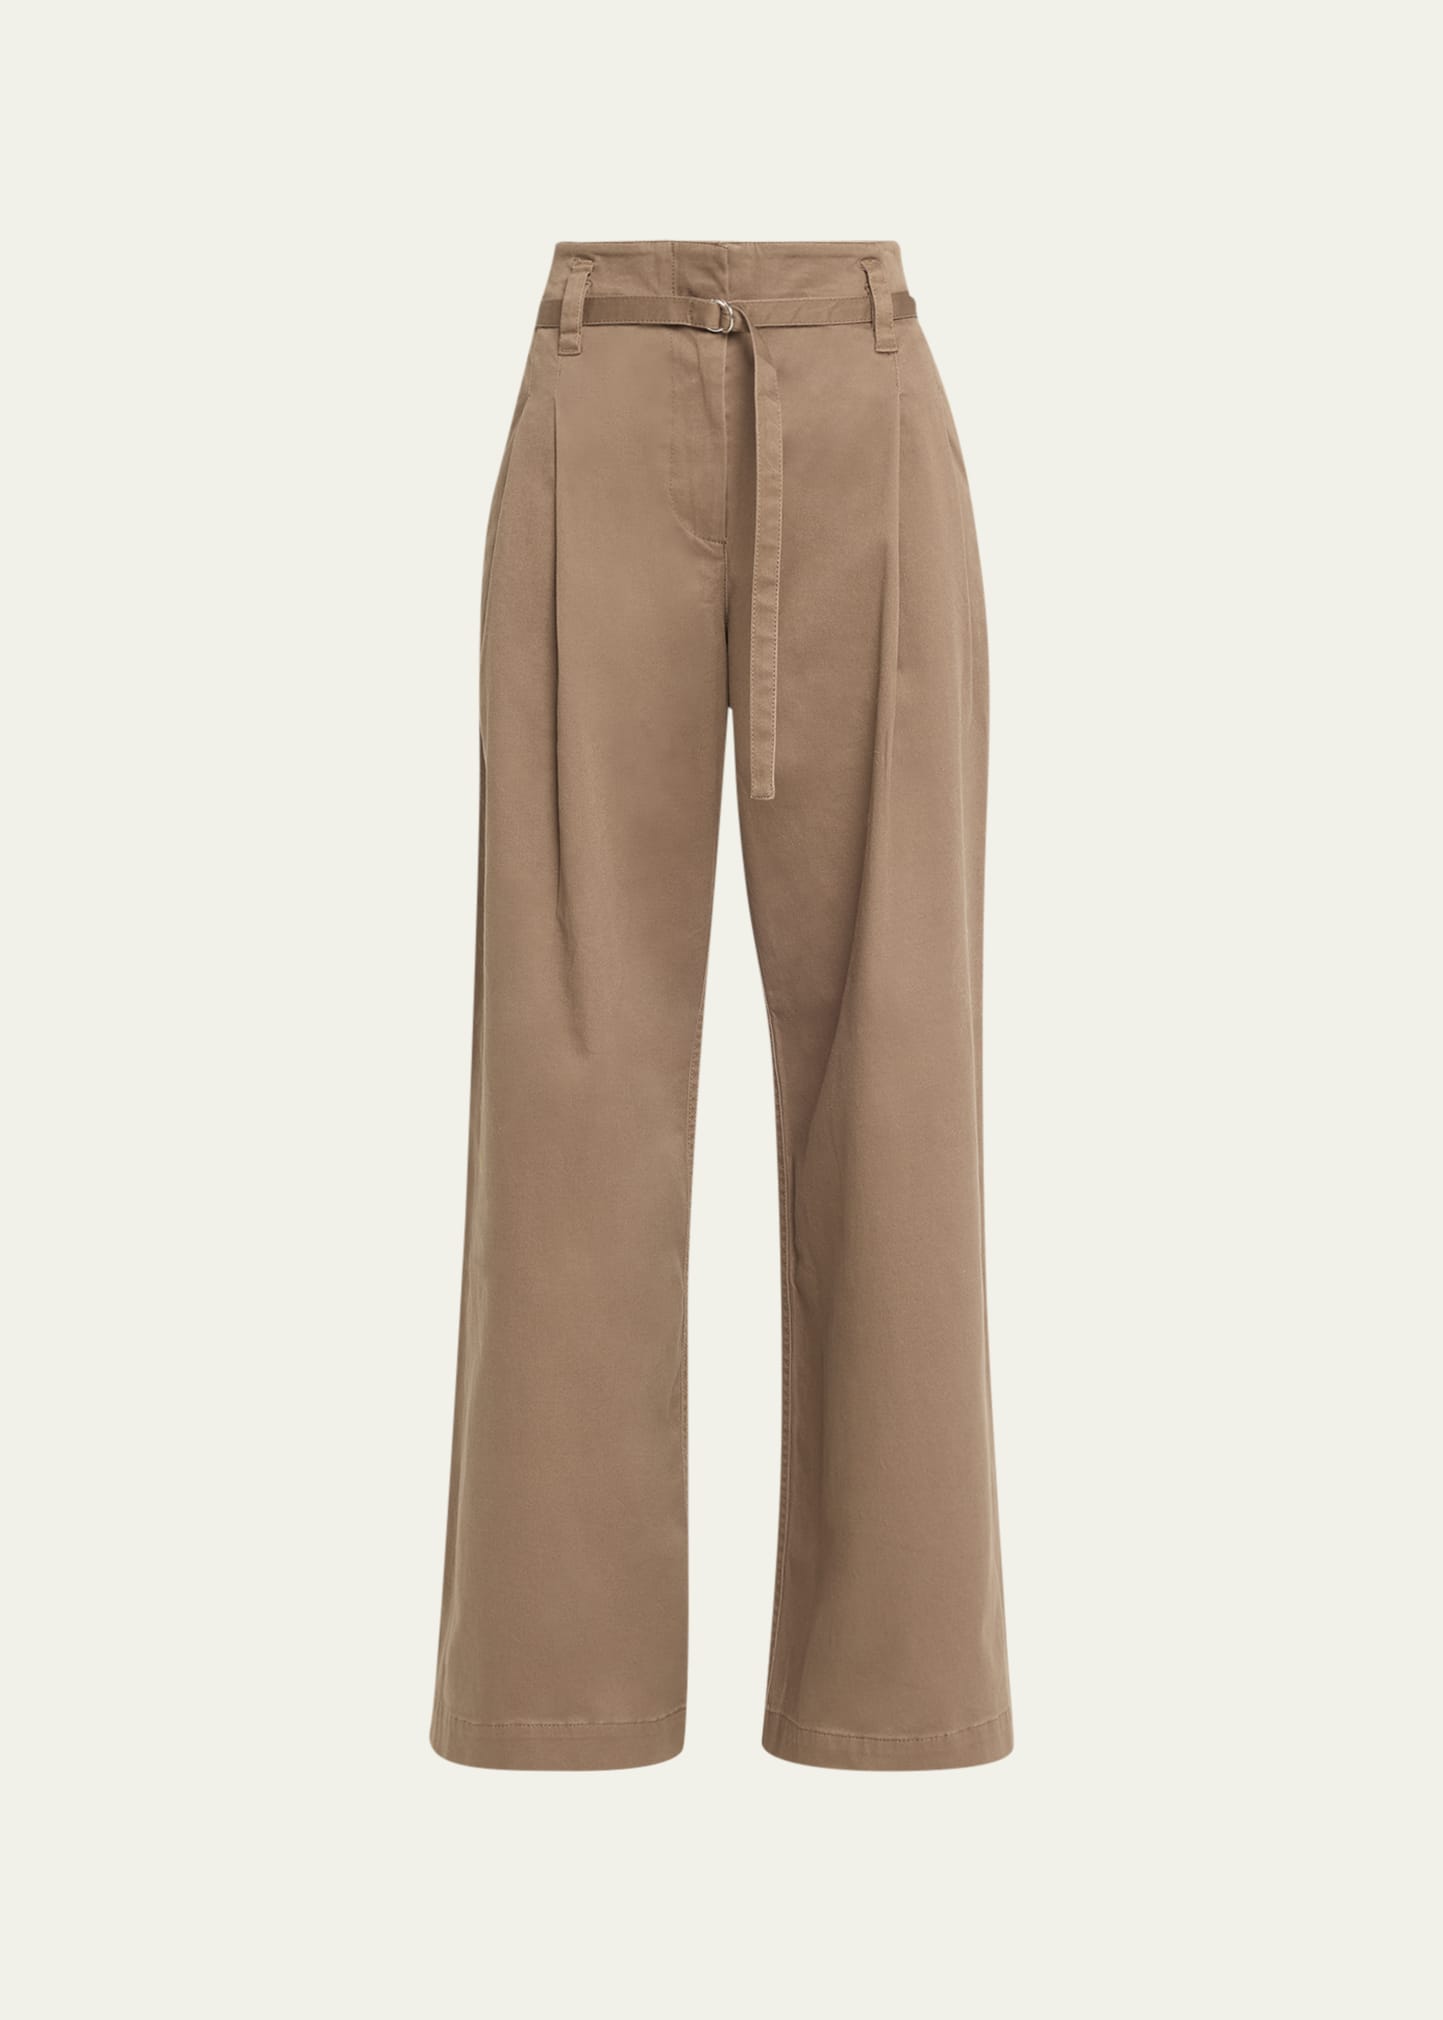 Proenza Schouler White Label Raver Belted Wide-leg Pants In Coffee